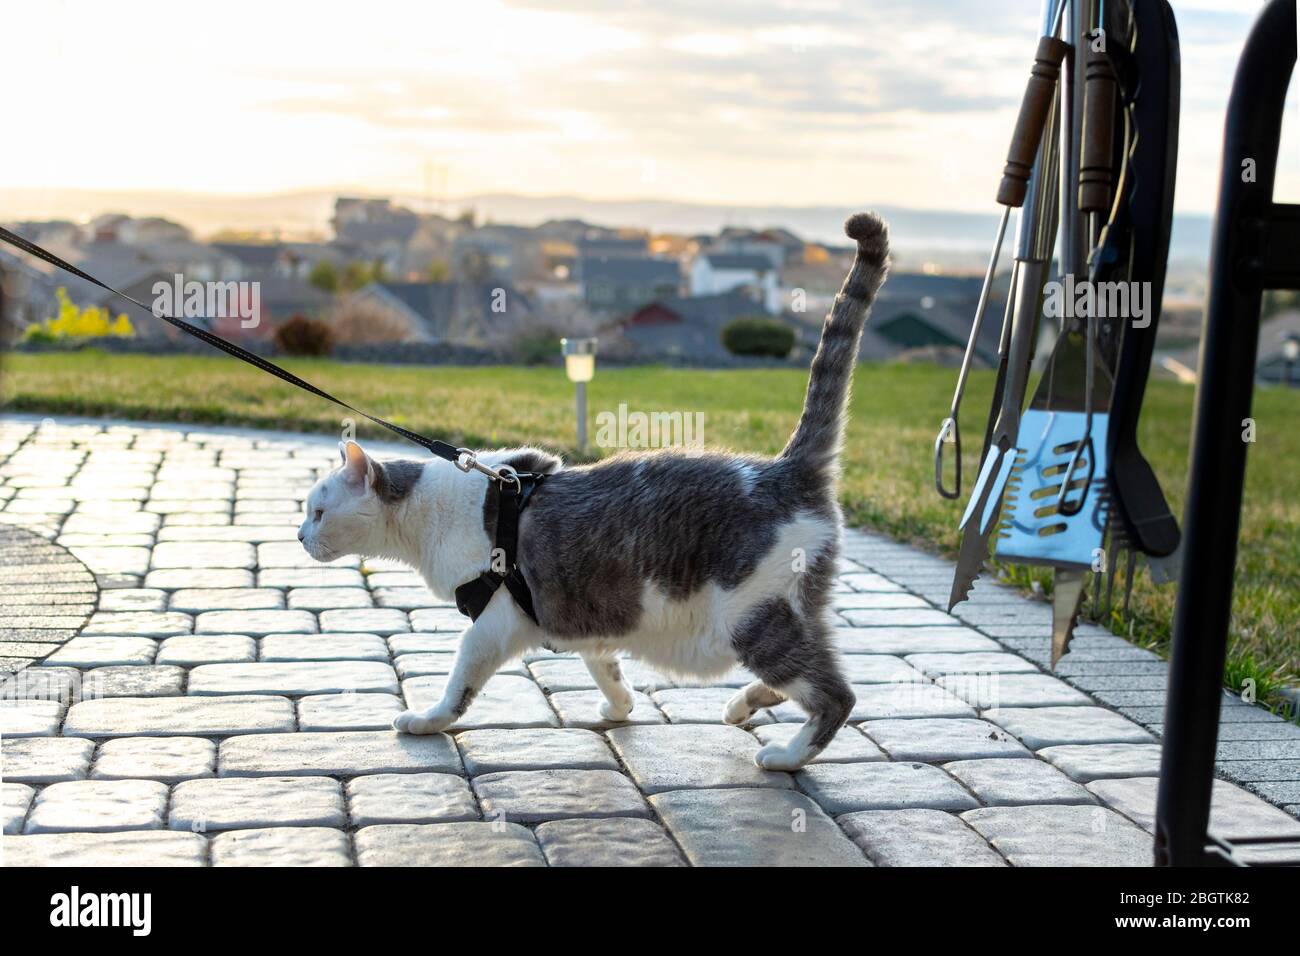 A shorthair domestic gray and white tabby cat walks outdoors on a patio while in a harness leash with the sun setting over a valley behind. Stock Photo